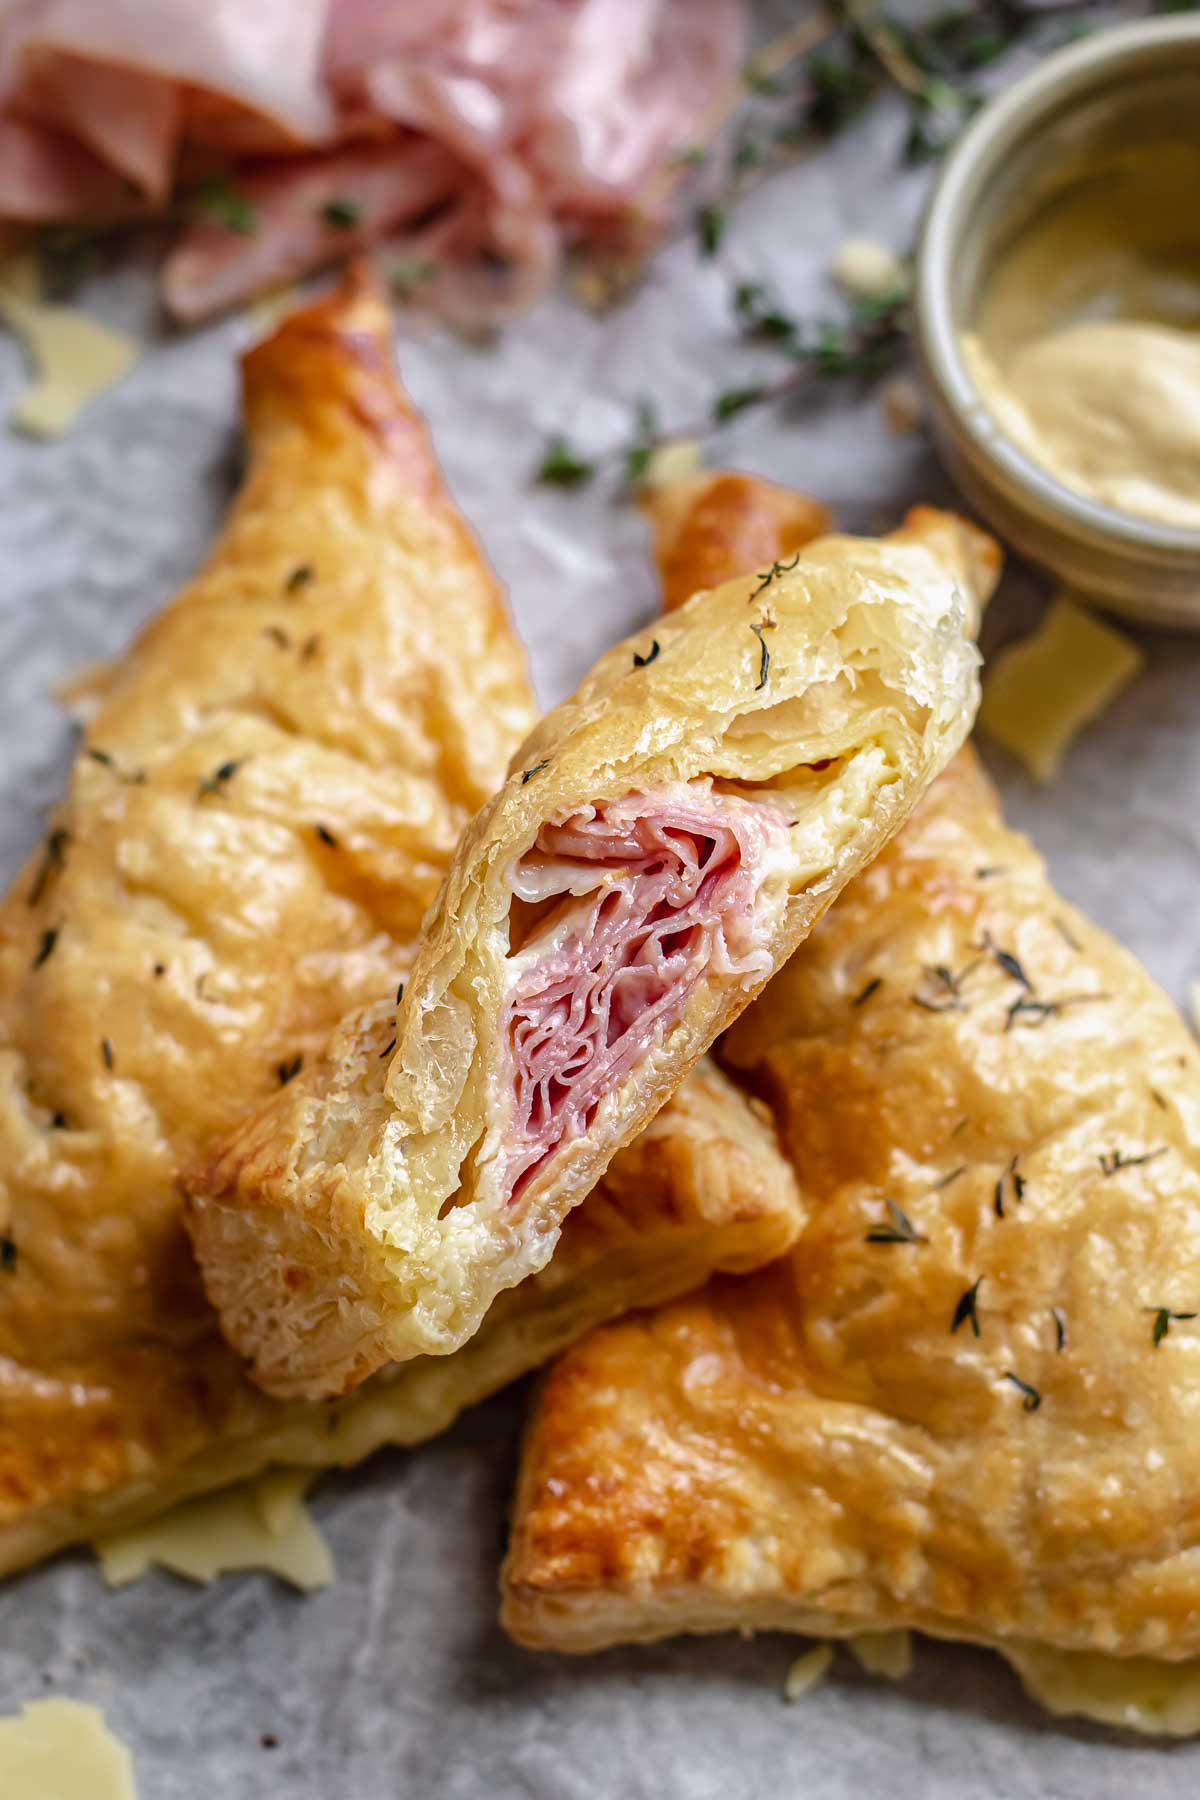 Ham and cheese turnovers with a bite removed to show the cross section.